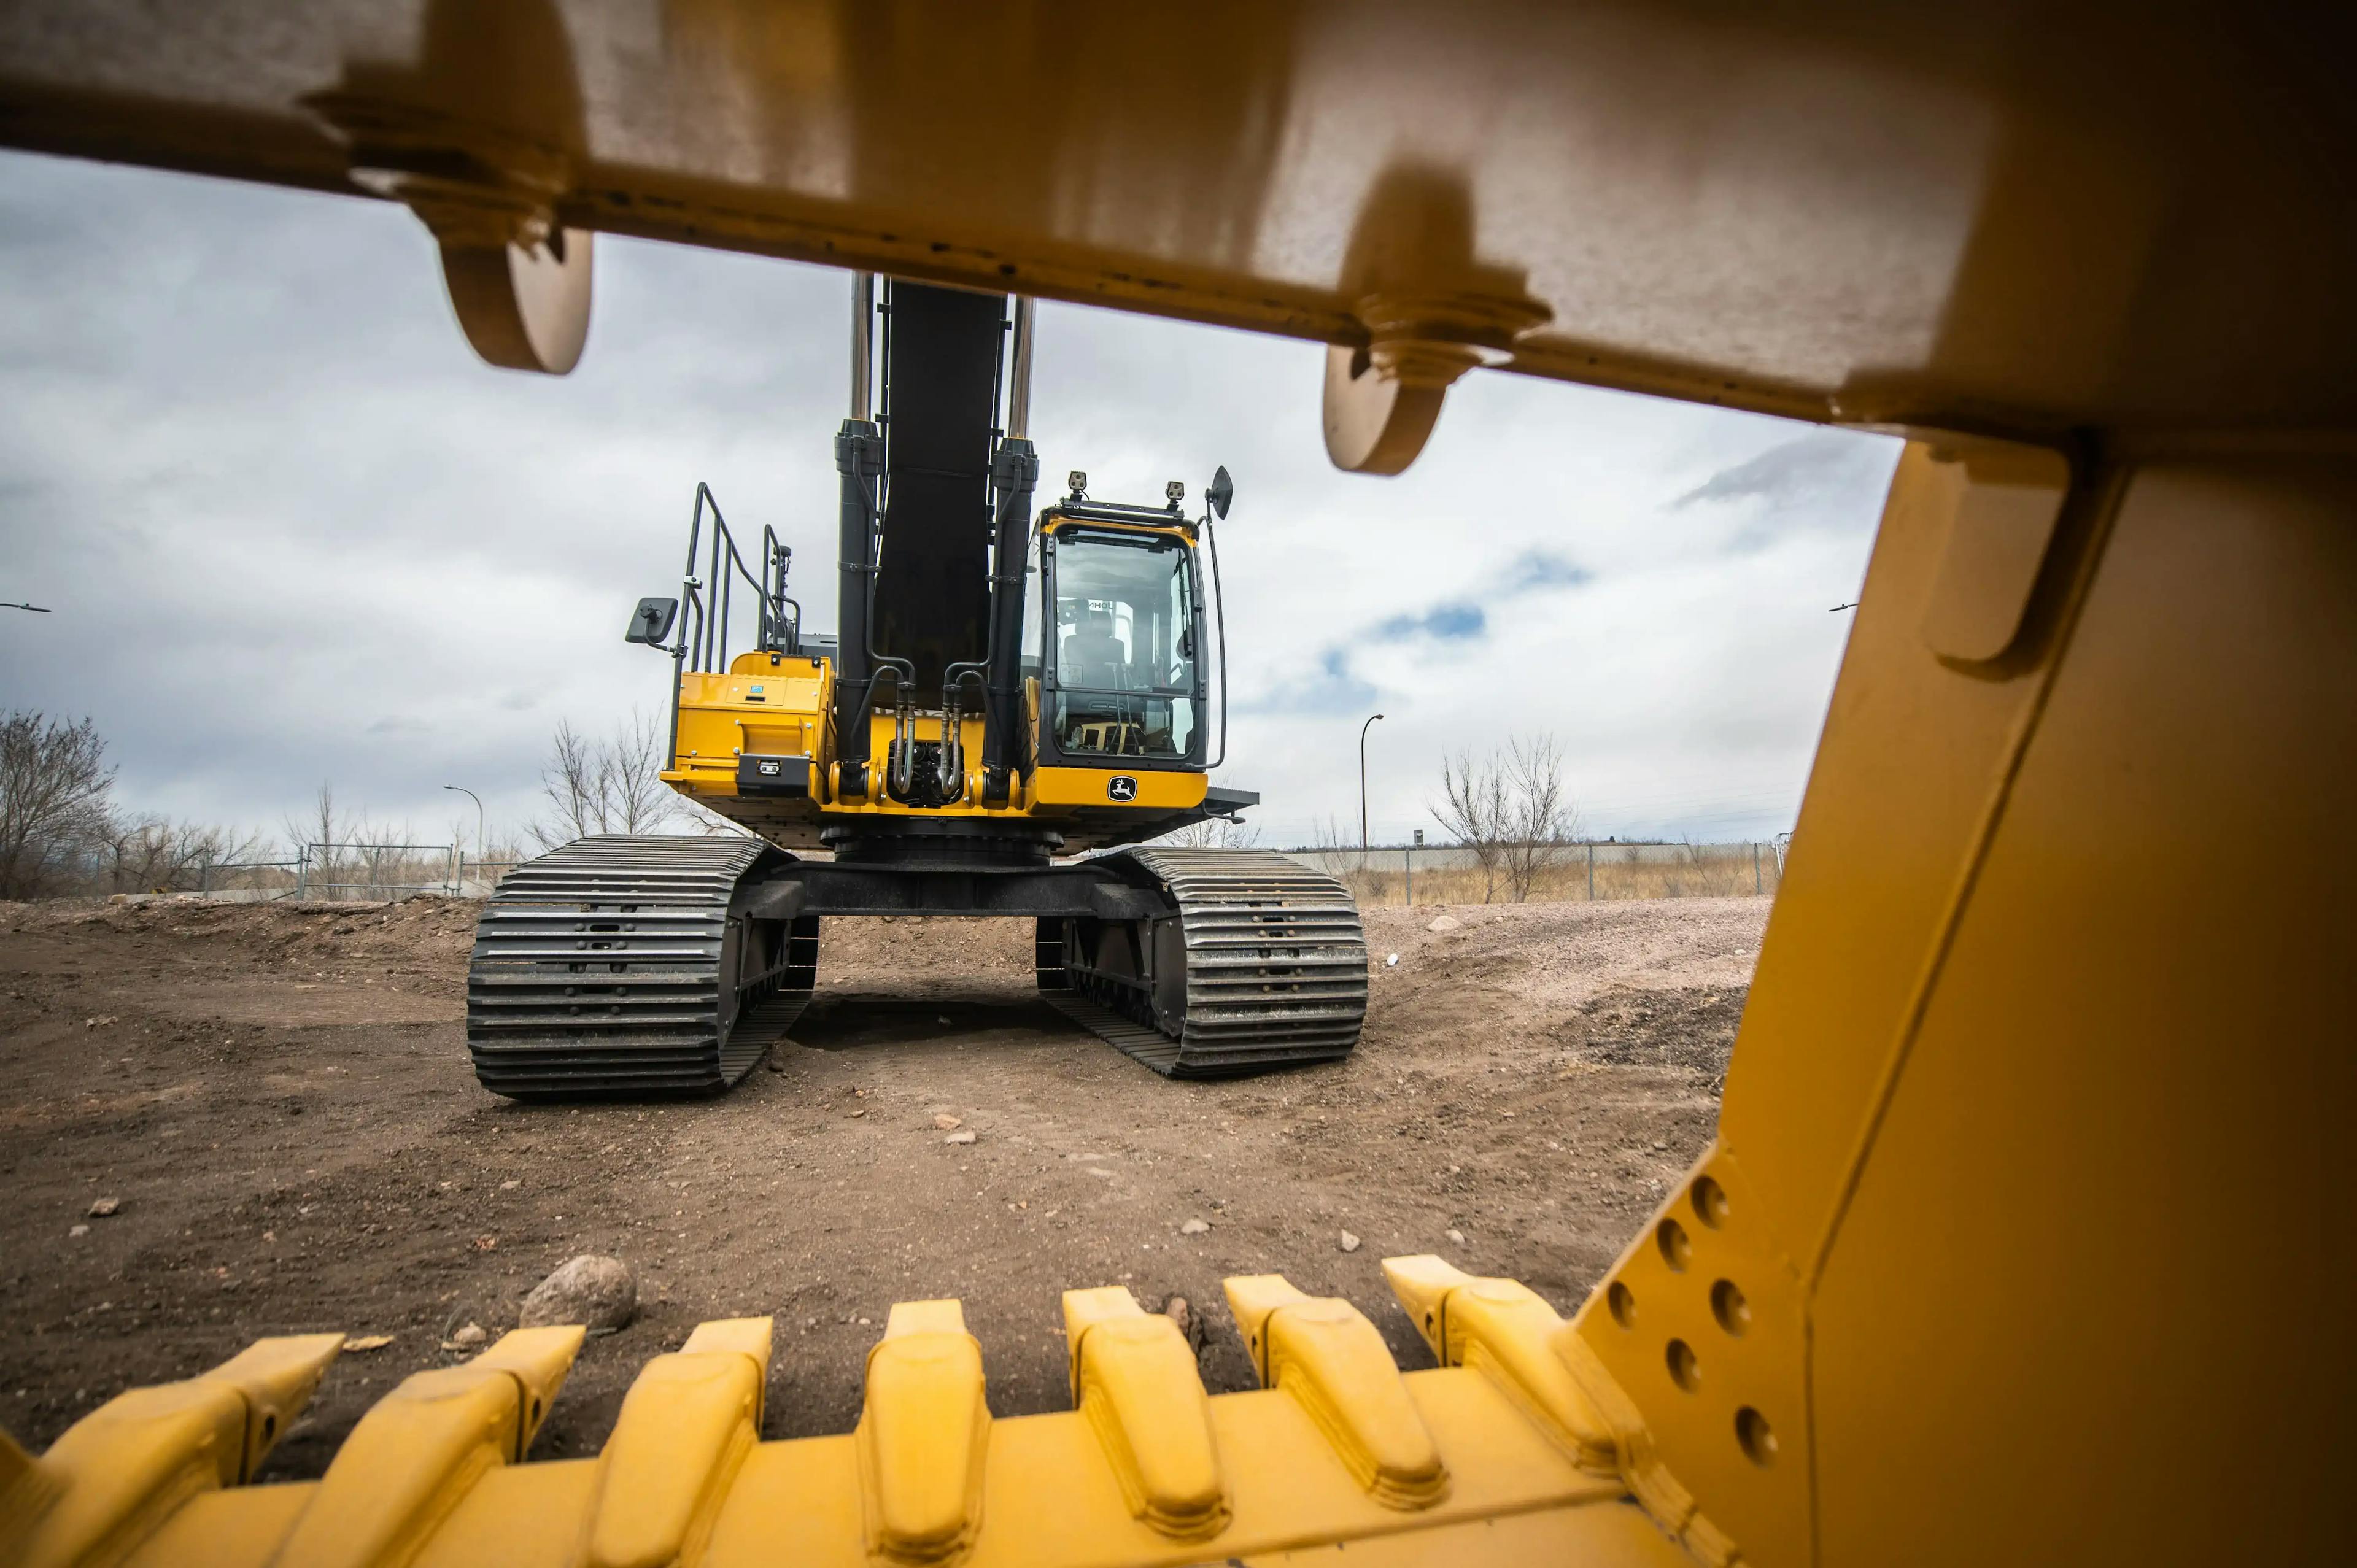 4Rivers Equipment Empowers Next Generation of Heavy Equipment Technicians Through Partnership and Donations